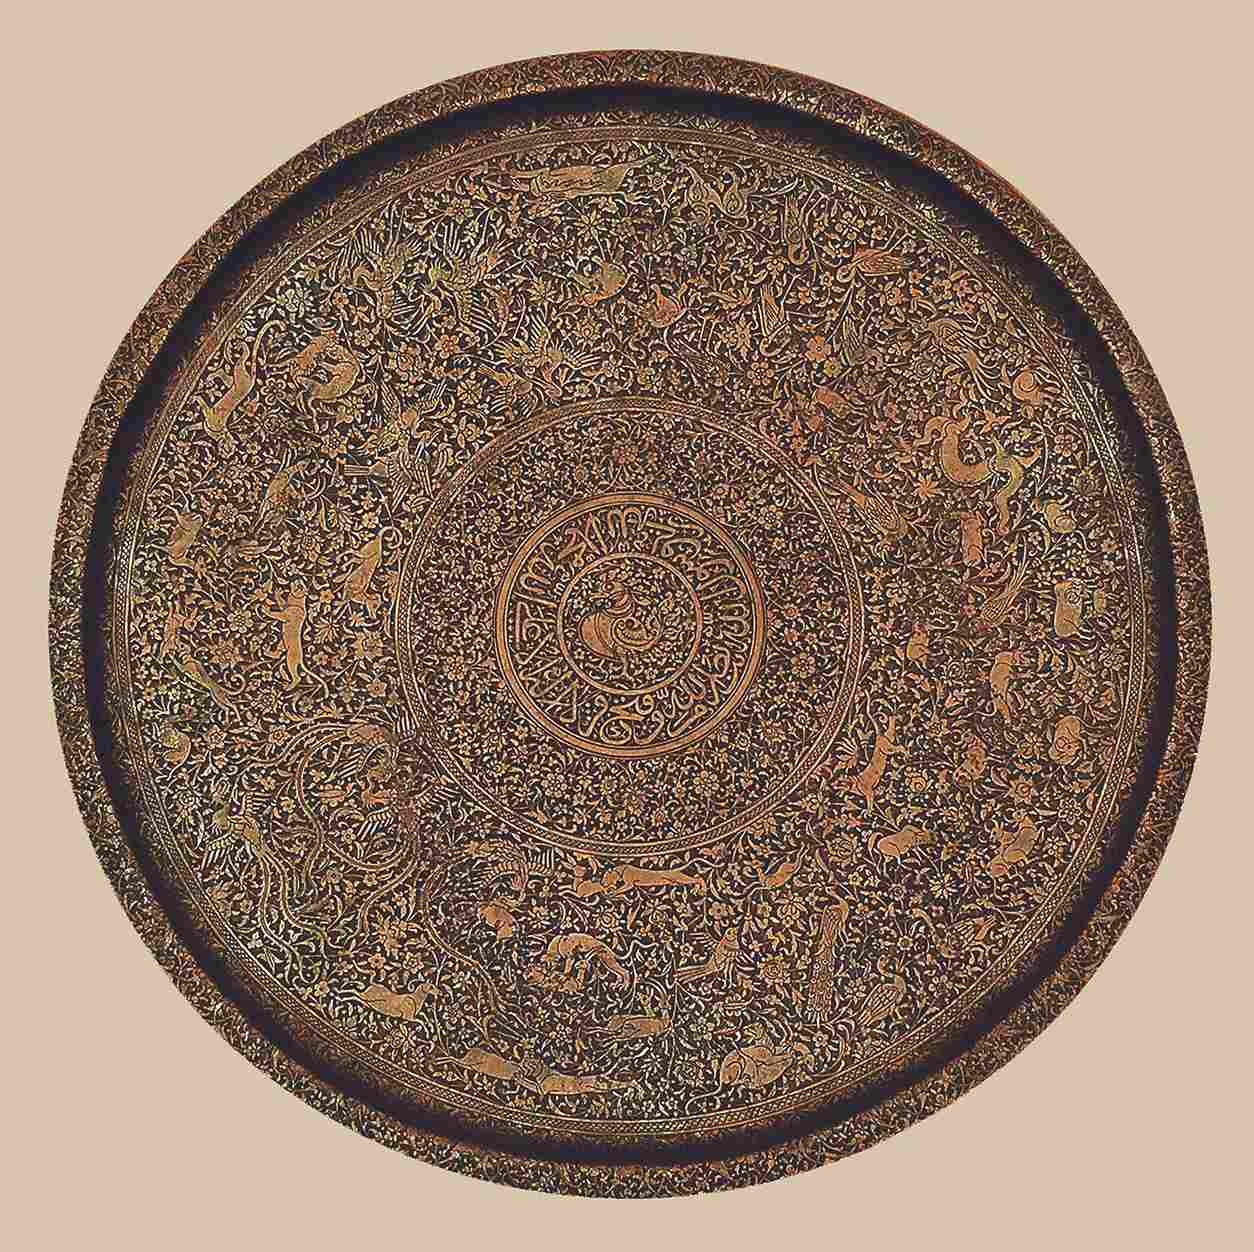 Circular salver (thali) with animals and birds amid animated floral arabesques
copper